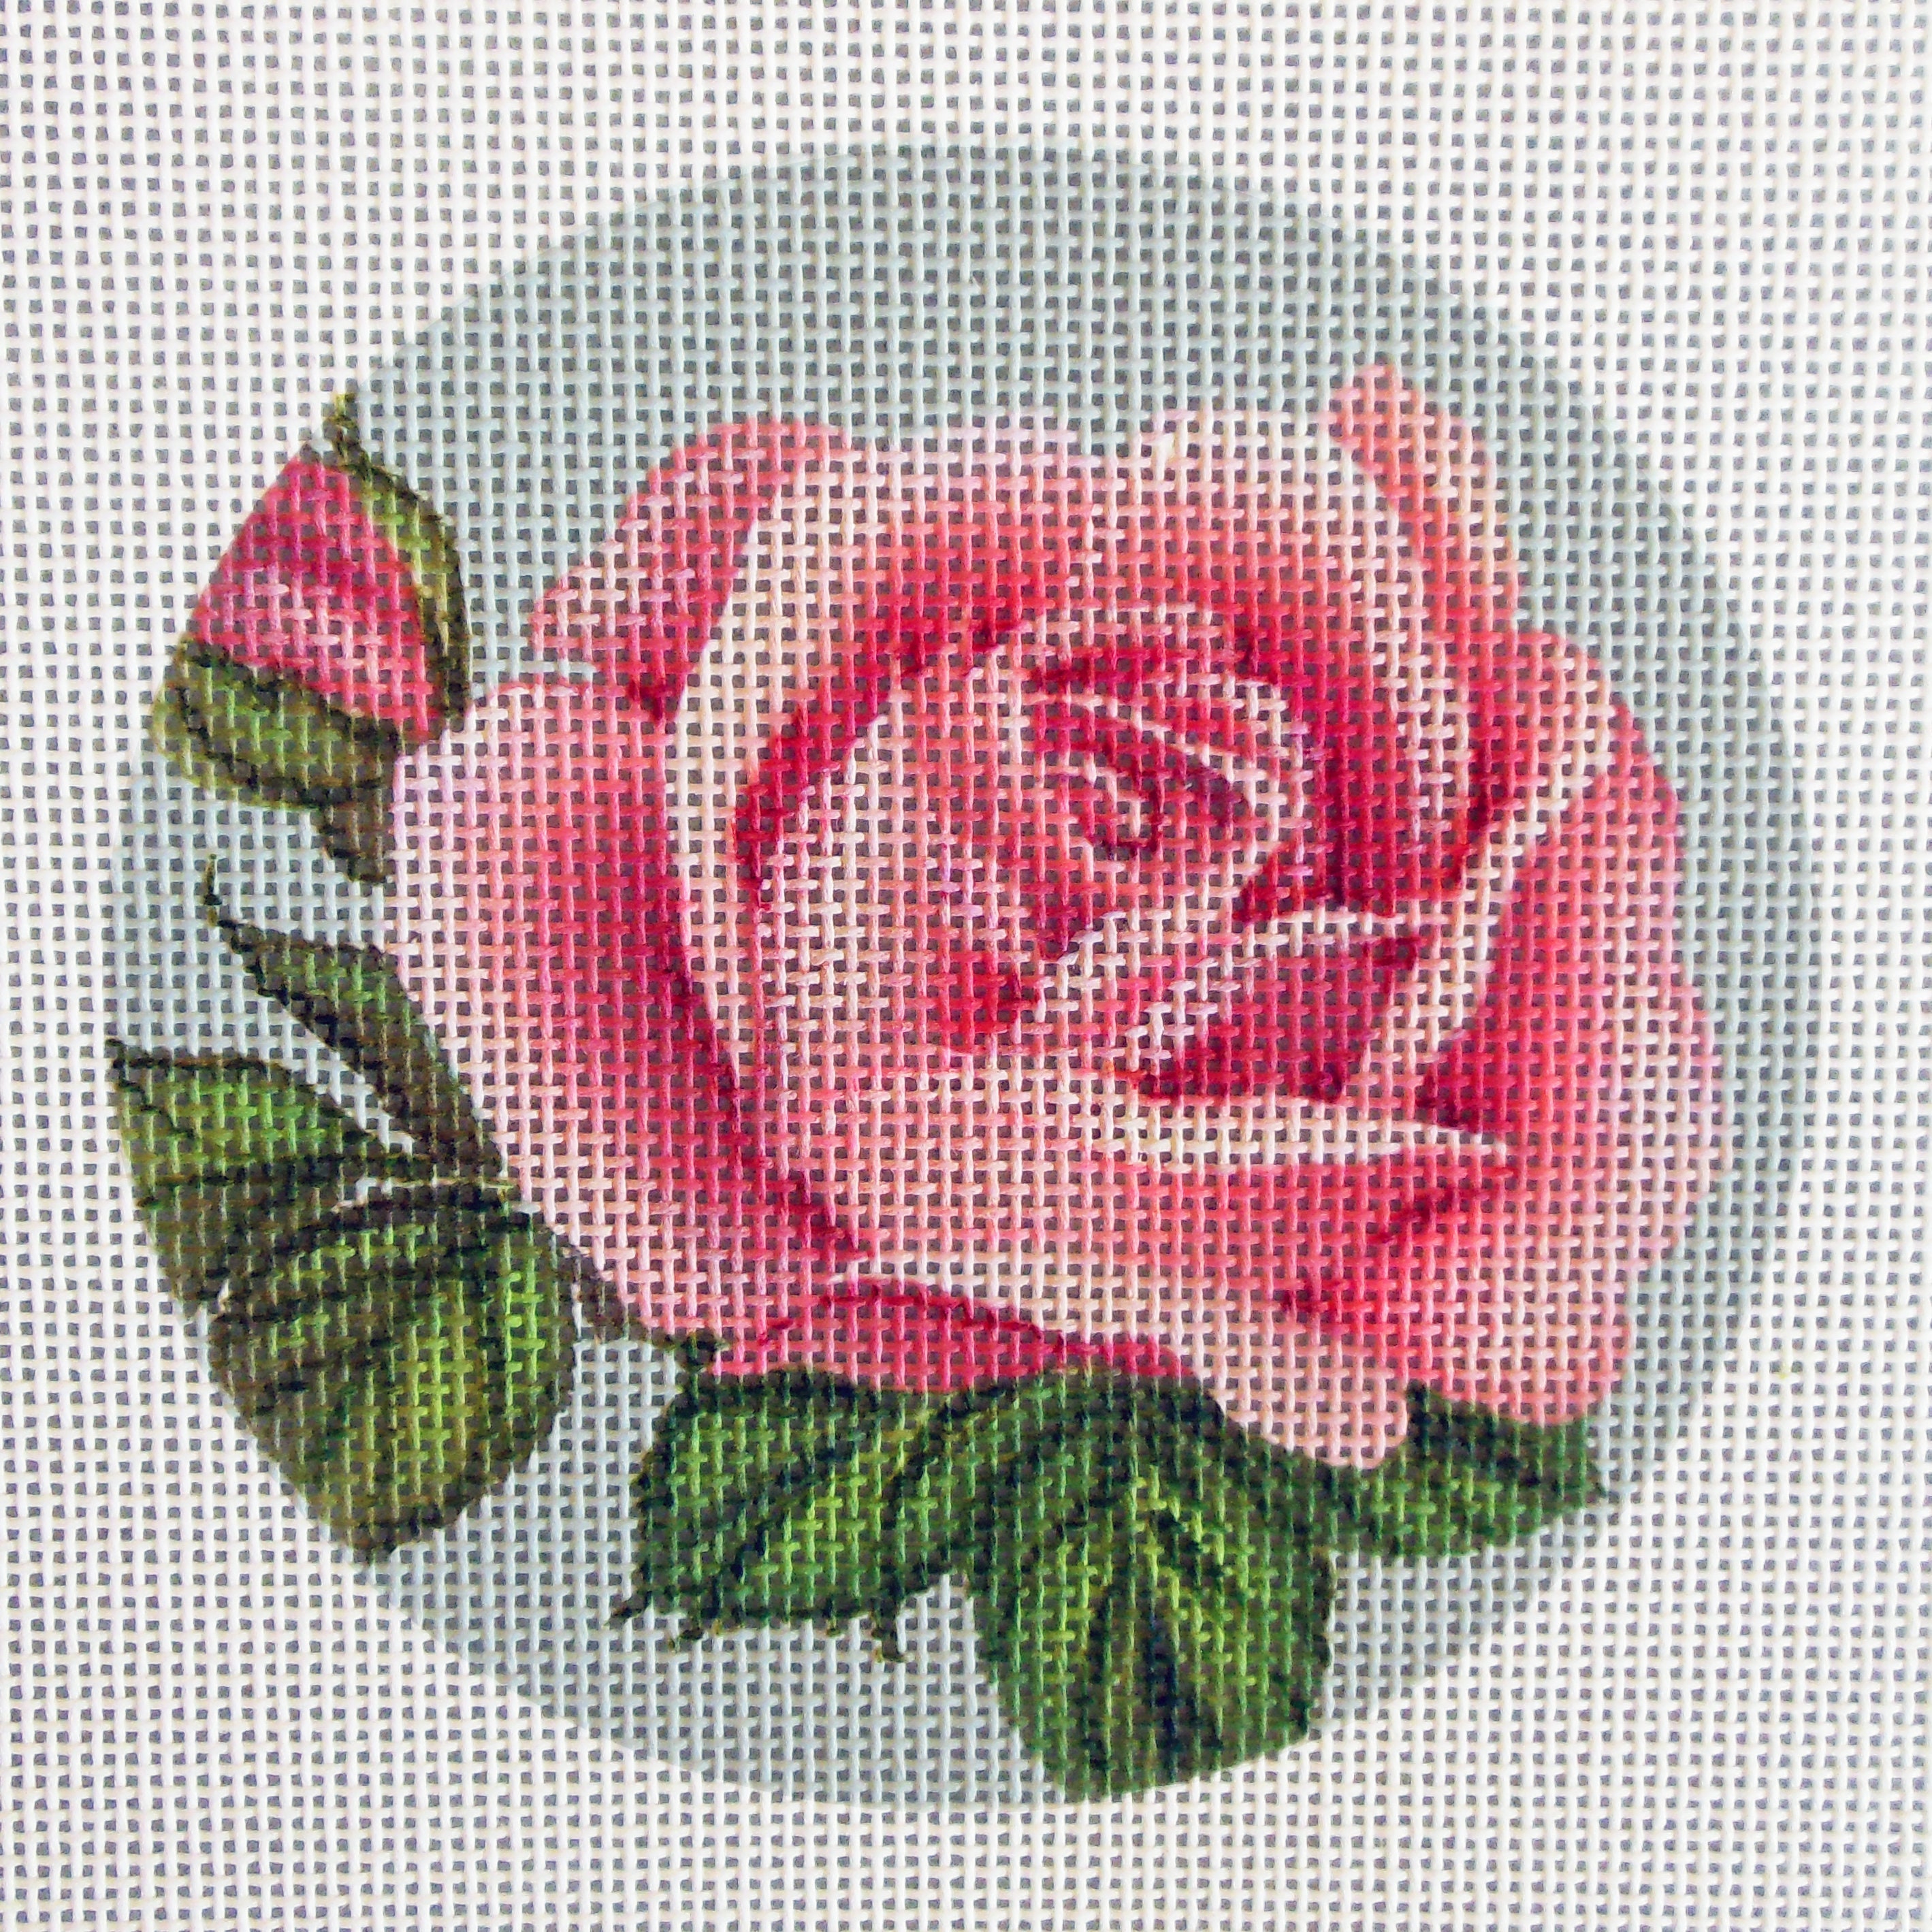 Sirens of the Sea with Roses Needlepoint Kit